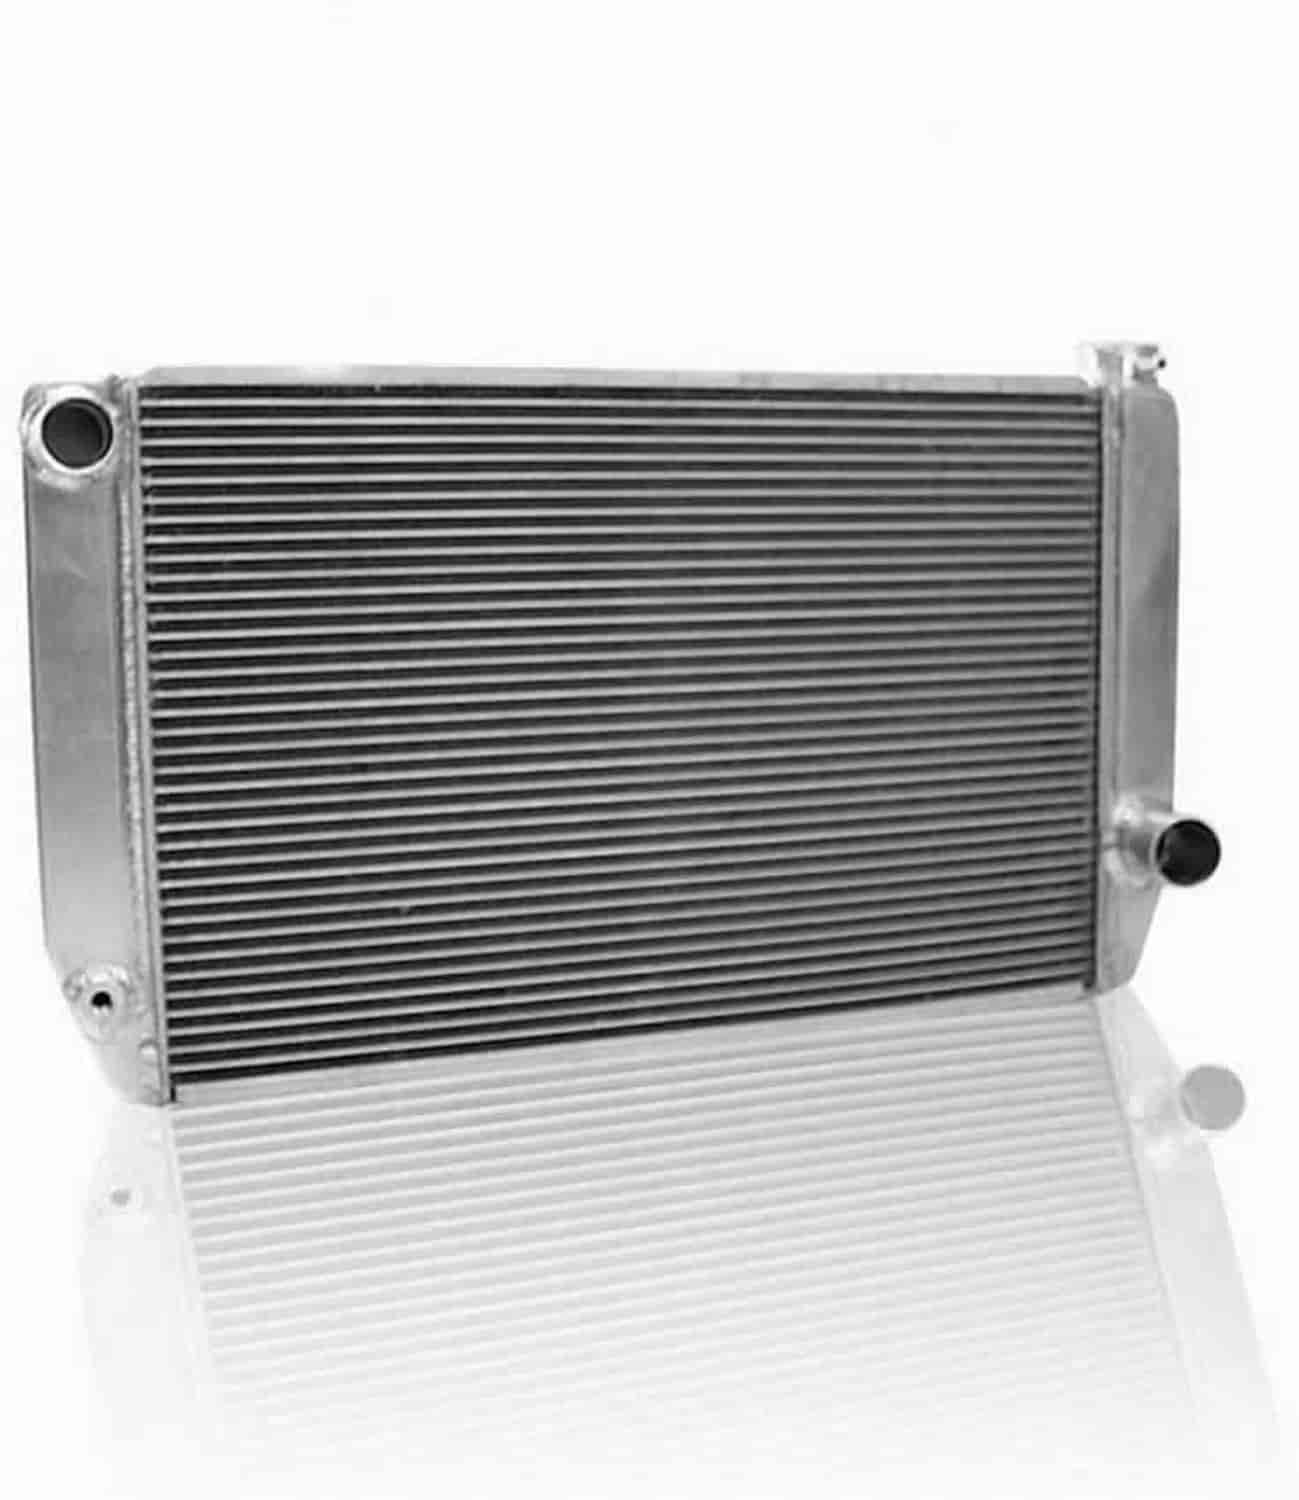 MegaCool Universal Fit Radiator Single Pass Crossflow Design 31" x 15.50" with Straight Outlet